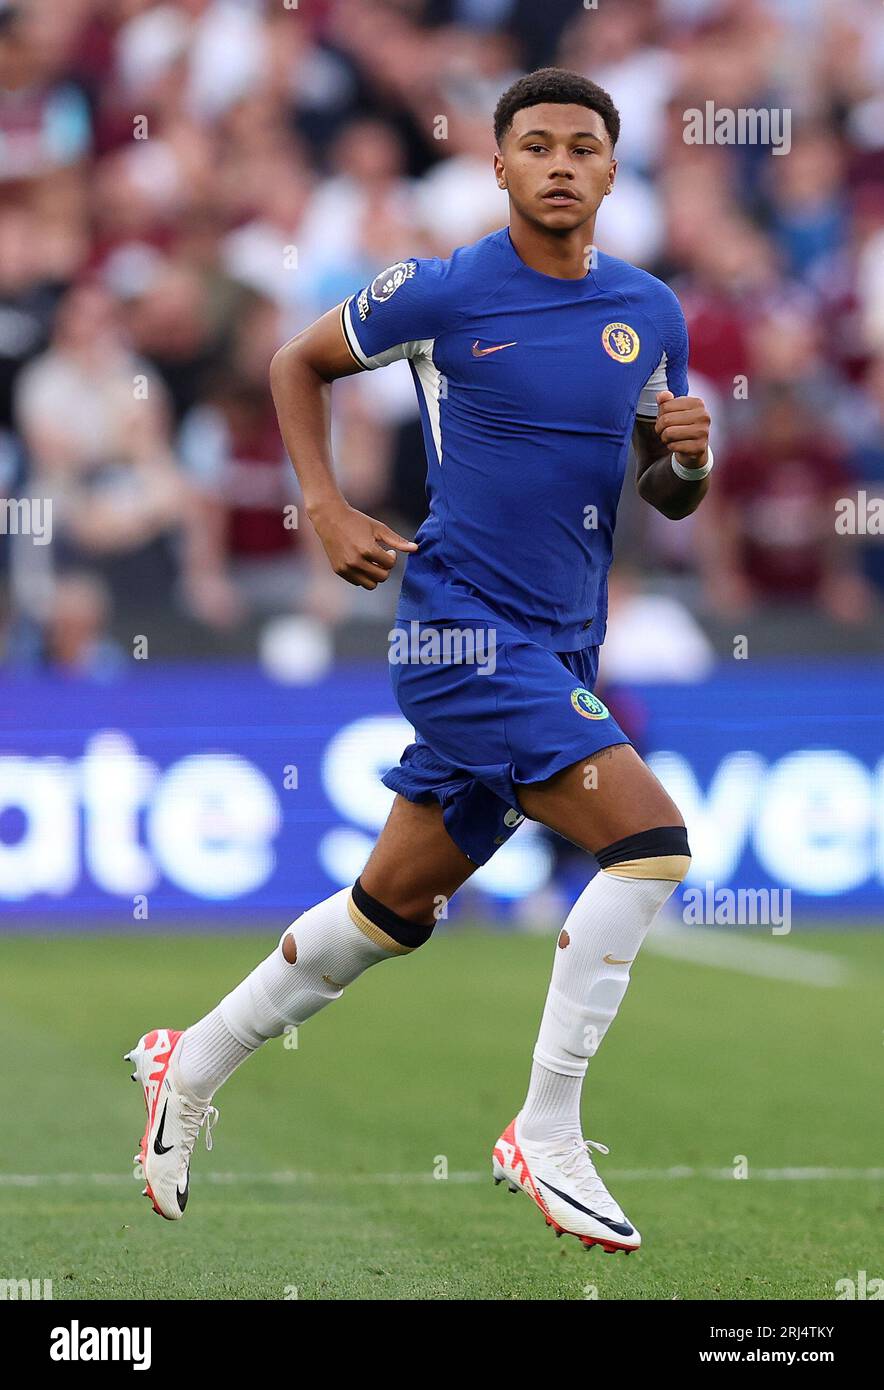 London, UK. 20th Aug, 2023. Mason Burstow of Chelsea during the Premier League match at the London Stadium, London. Picture credit should read: Paul Terry/Sportimage Credit: Sportimage Ltd/Alamy Live News Stock Photo